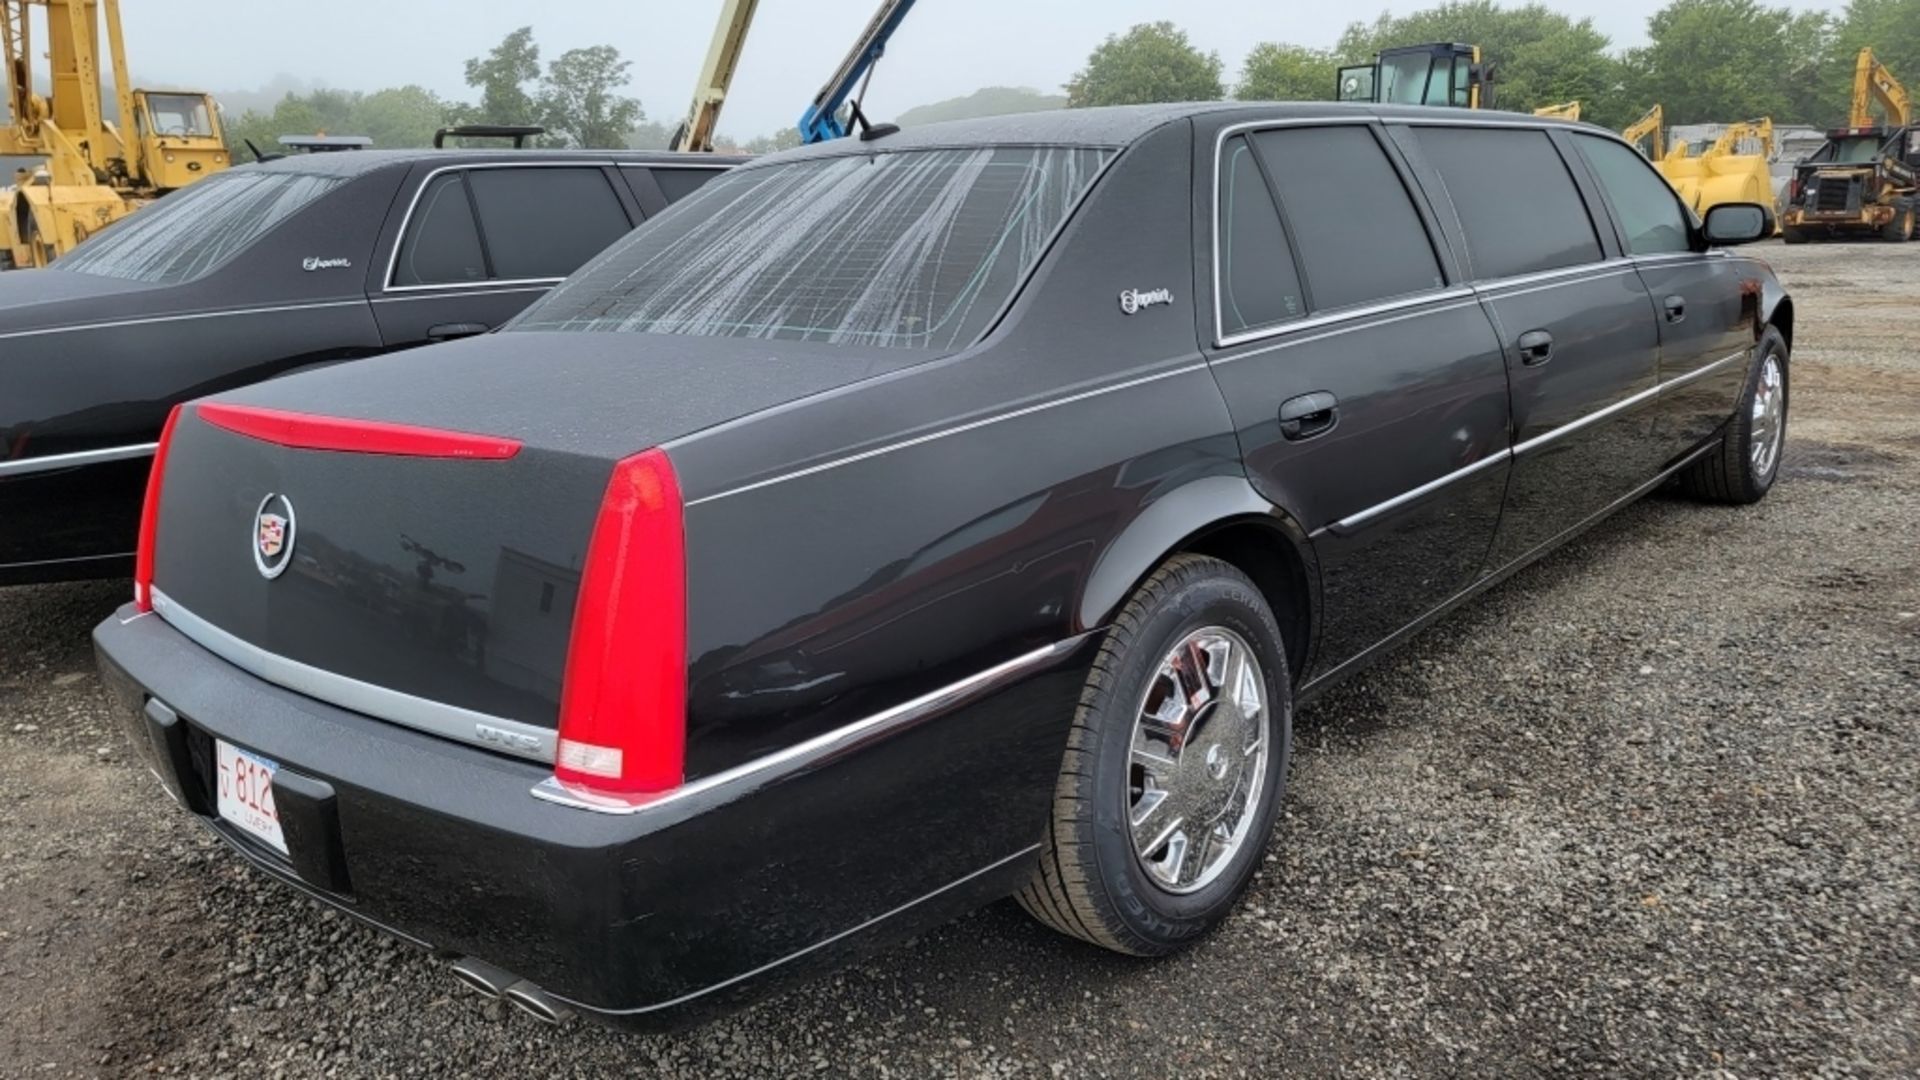 2008 Cadillac DTS Limousine - Image 2 of 9